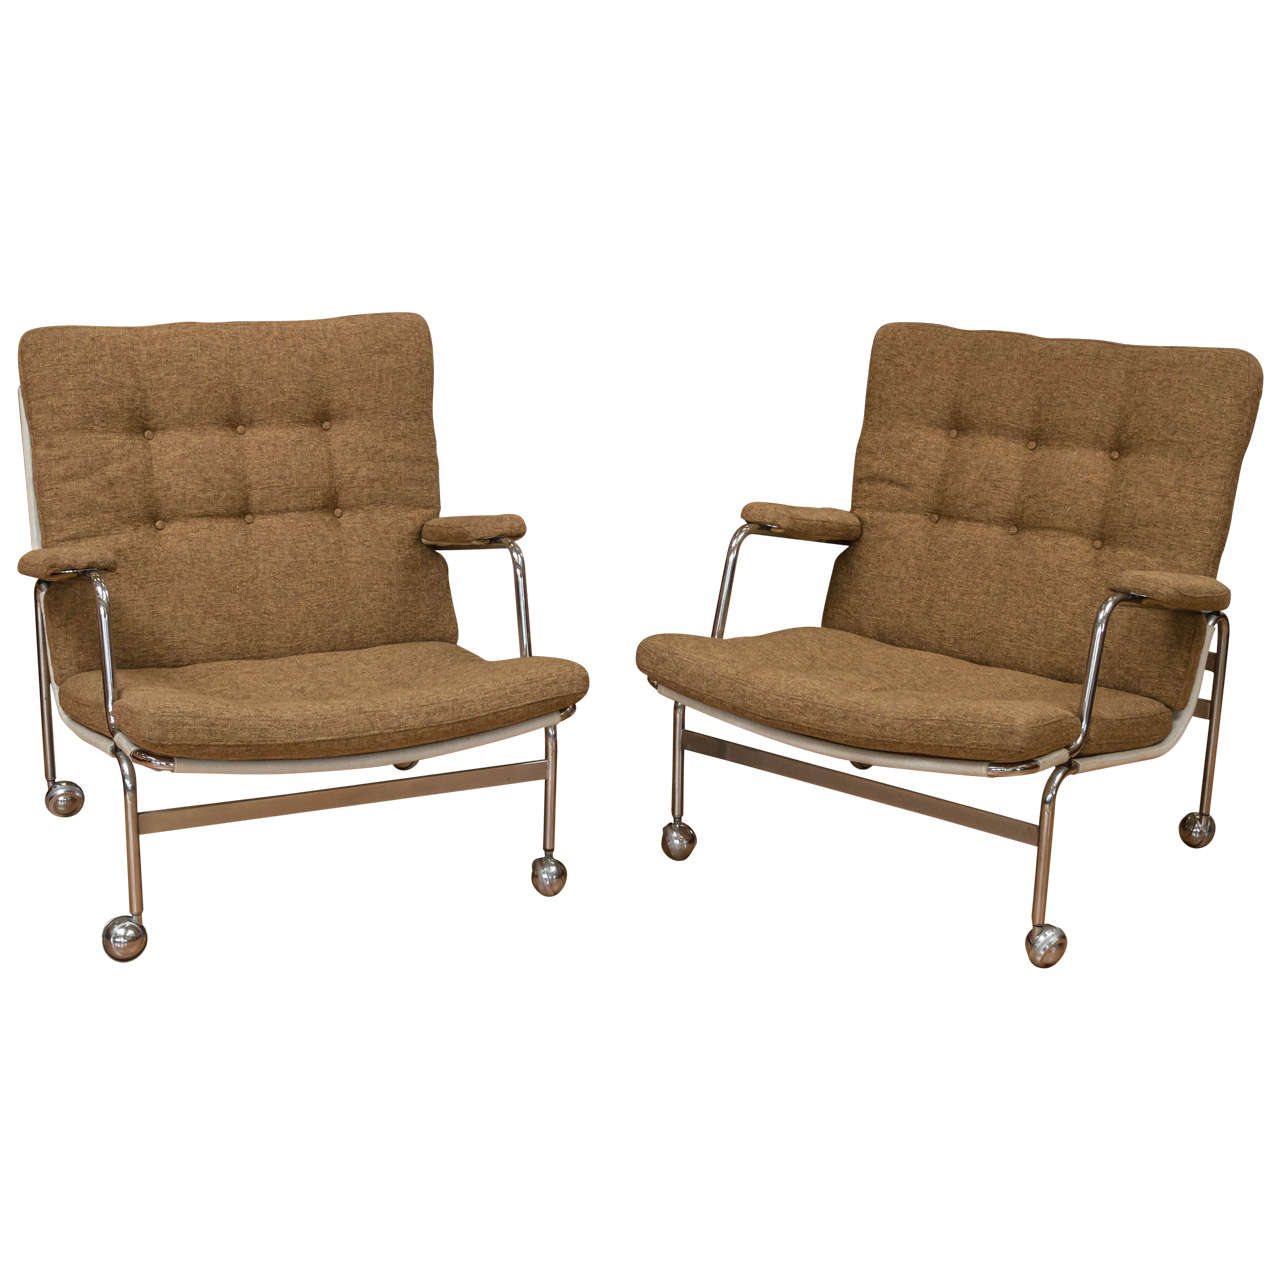 Pair of Bruno Mathsson Karin Lounge Chairs for Dux